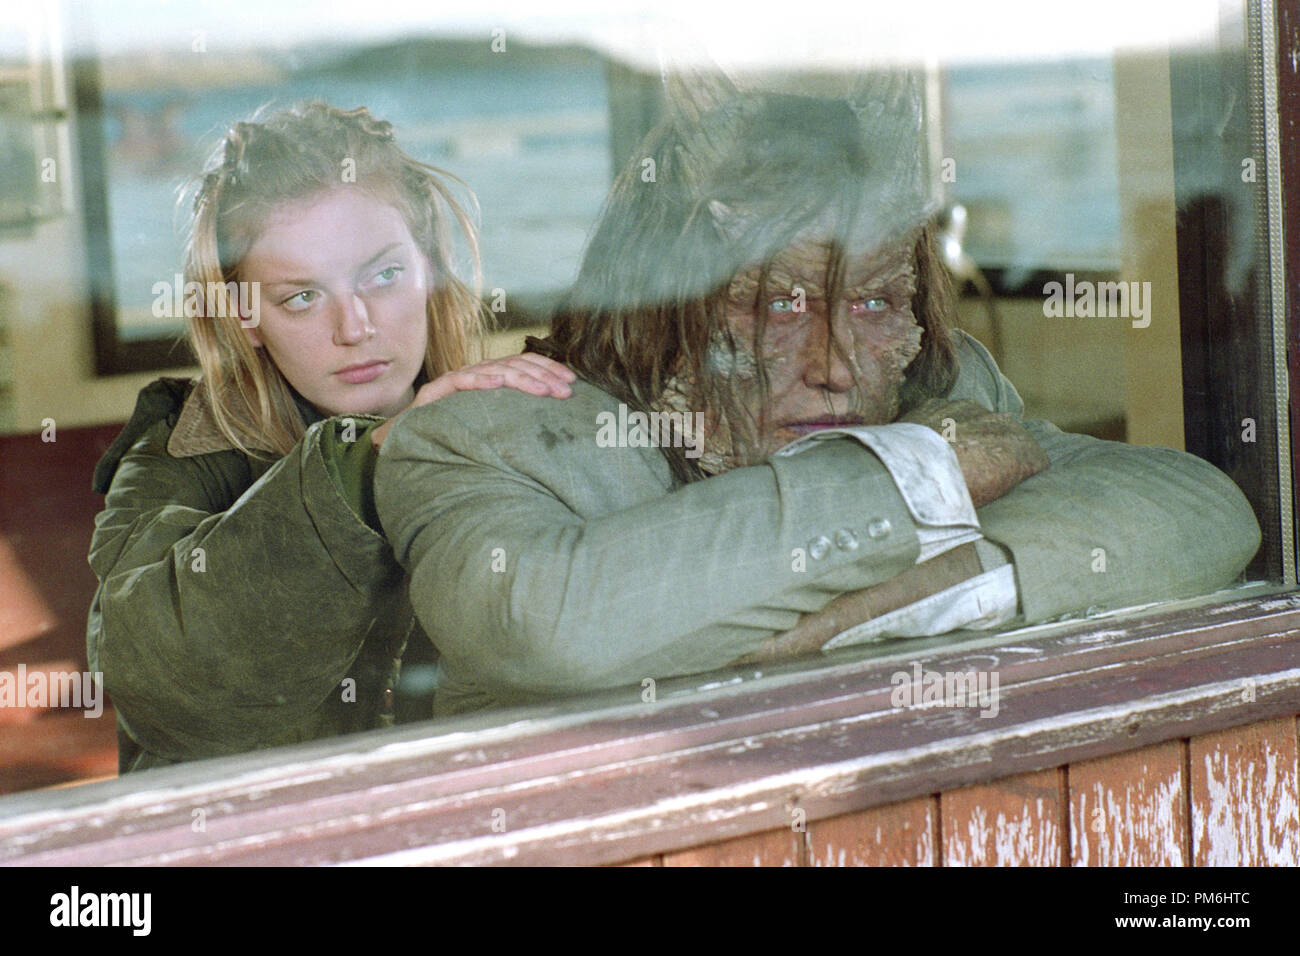 Film Still / Publicity Still from 'No Such Thing' Sarah Polley, Robert John Burke © 2001 United Artists Photo credit: Richard Sylvarnes  File Reference # 30777007THA  For Editorial Use Only -  All Rights Reserved Stock Photo